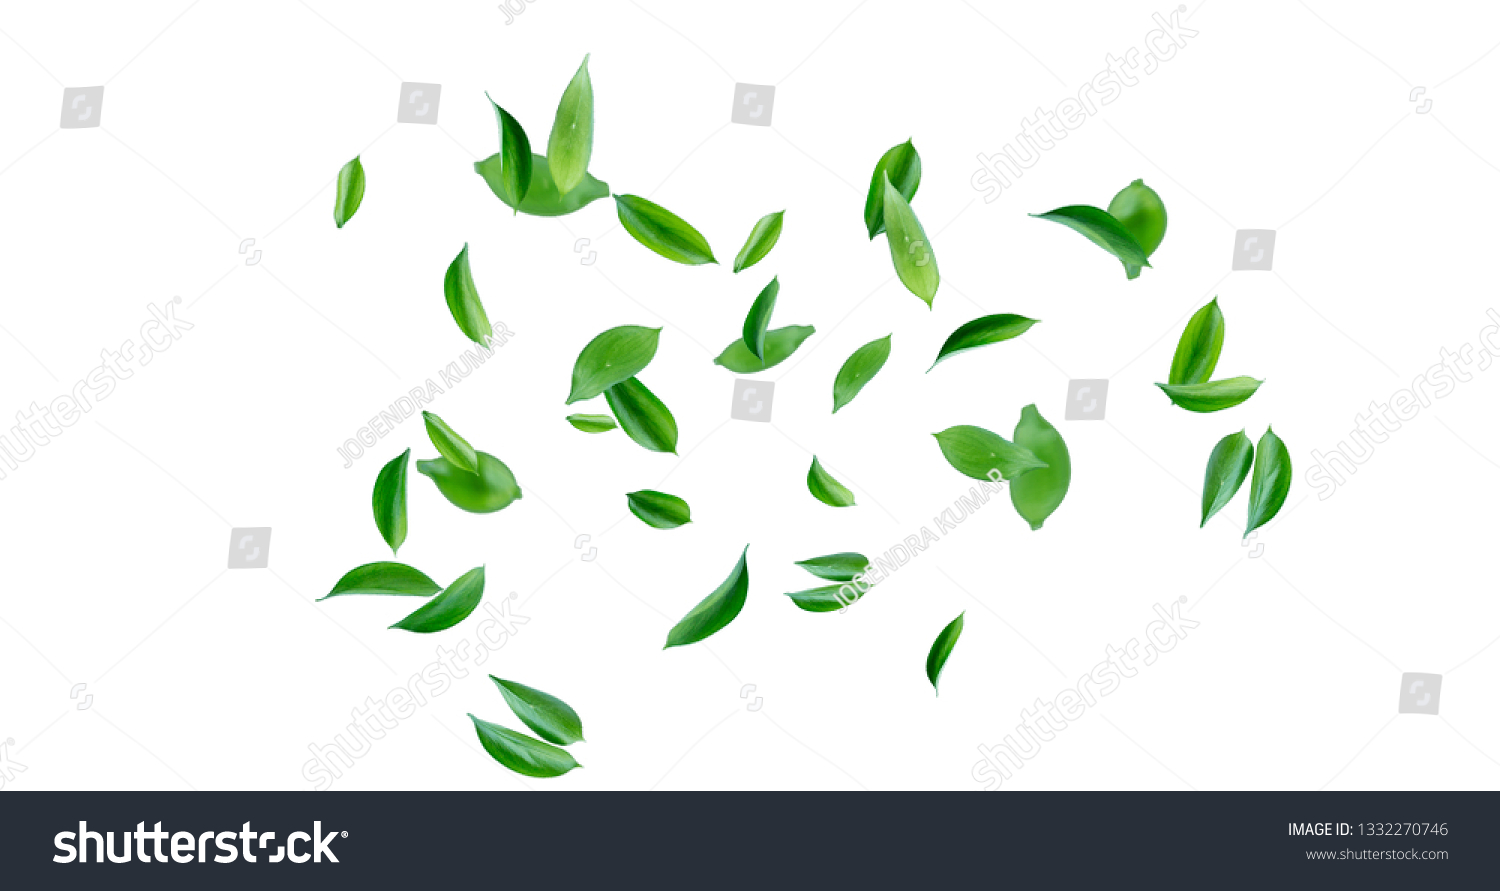 Nature Tree Leaves image with white background #1332270746